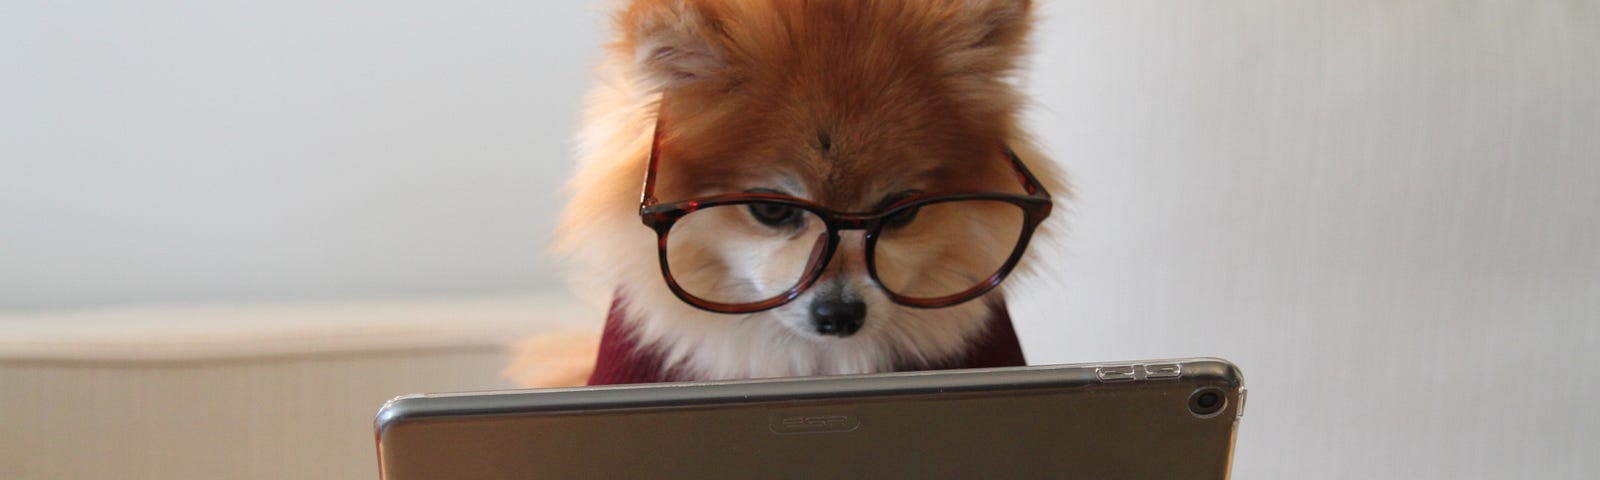 Dog with glasses siting behind table looking at apple Ipad tablet